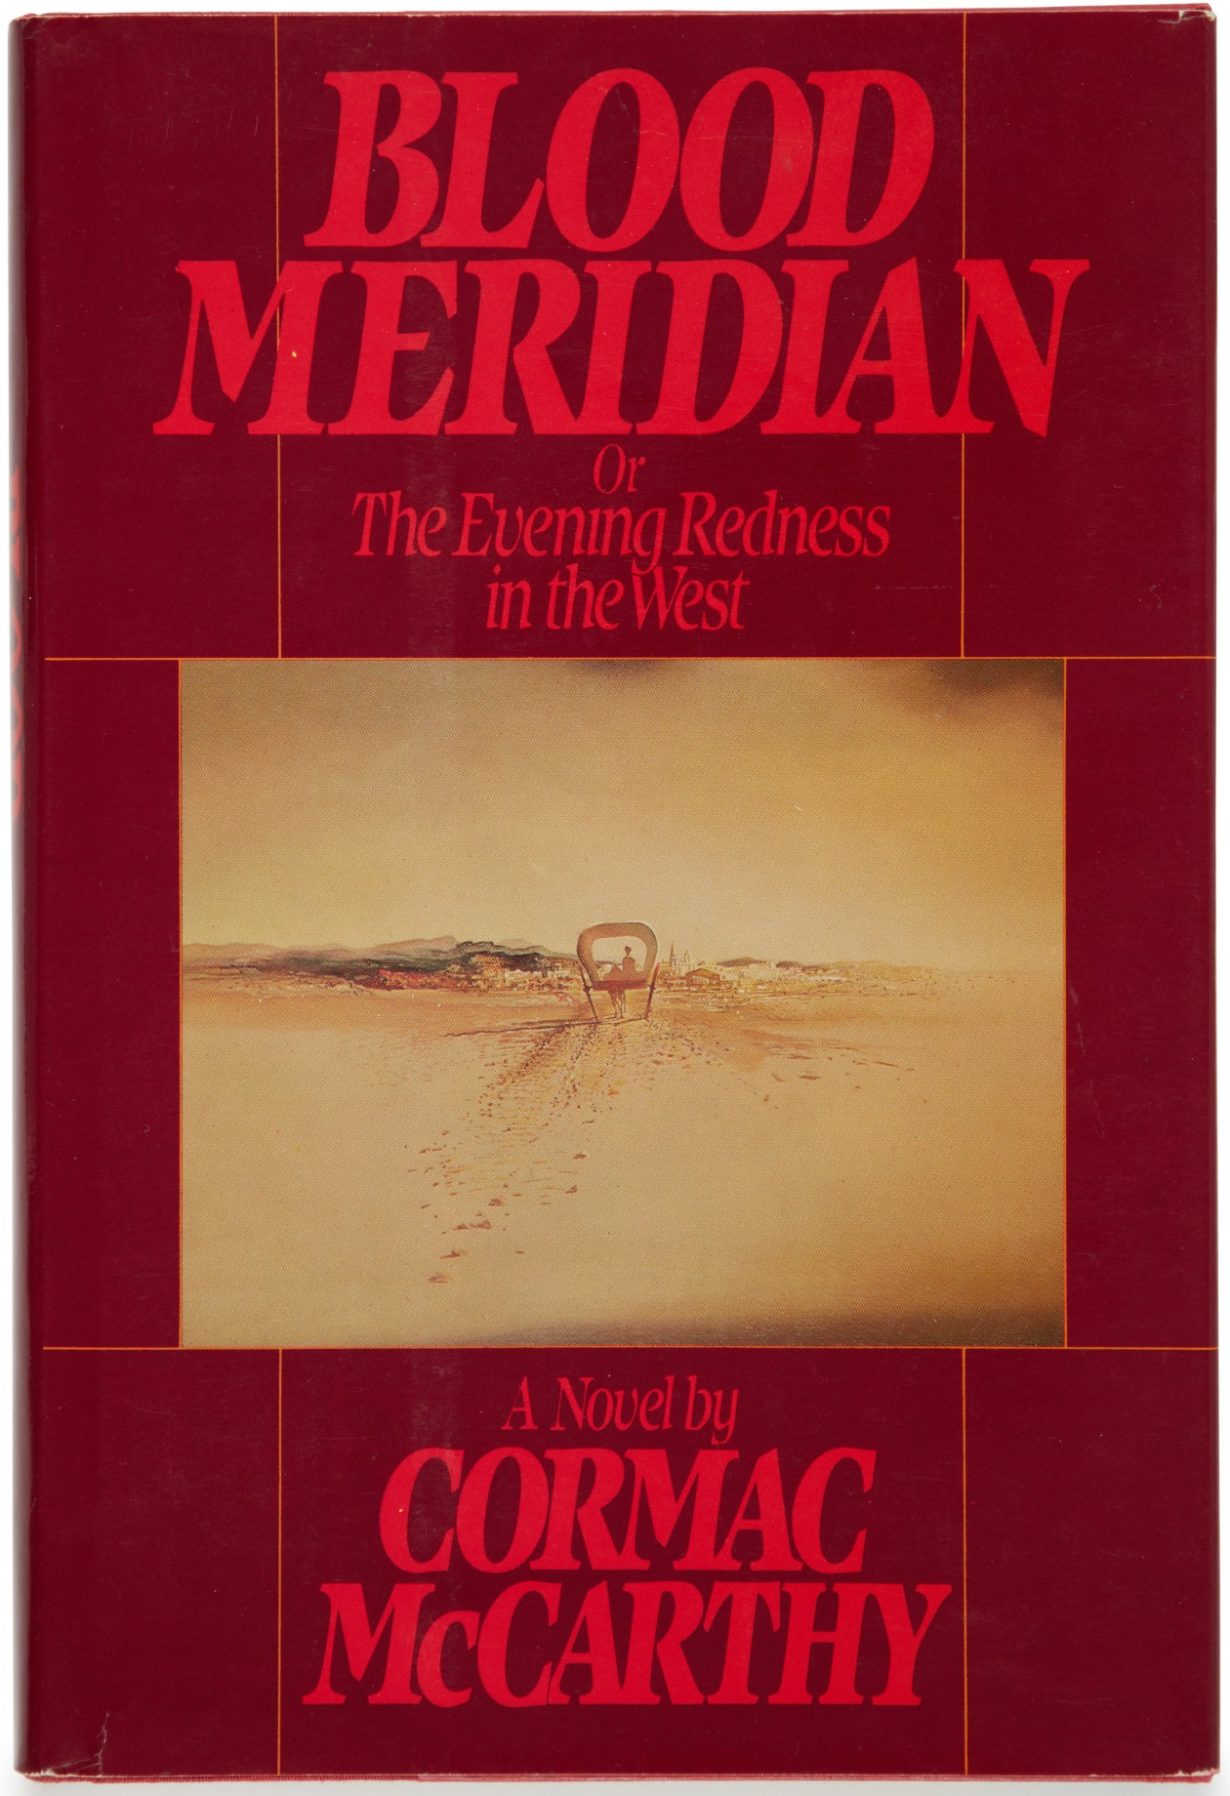 Cover artwork for Blood Meridian or The Evening Redness in the West. New York: Random House, 1985